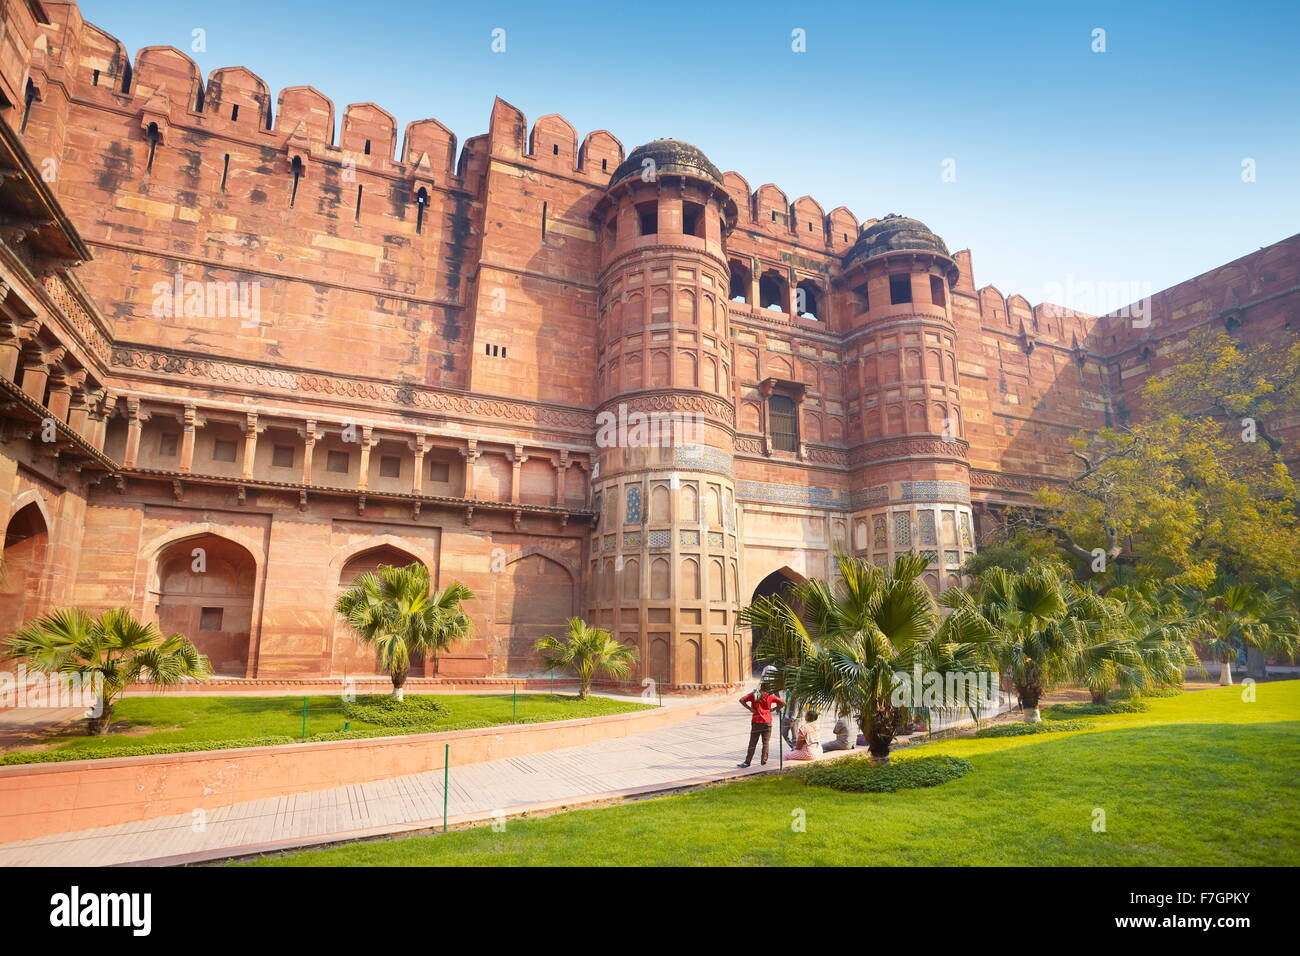 Agra Red Fort - The Amar Singh Gate, fortified main entrance gate, Agra, India Stock Photo